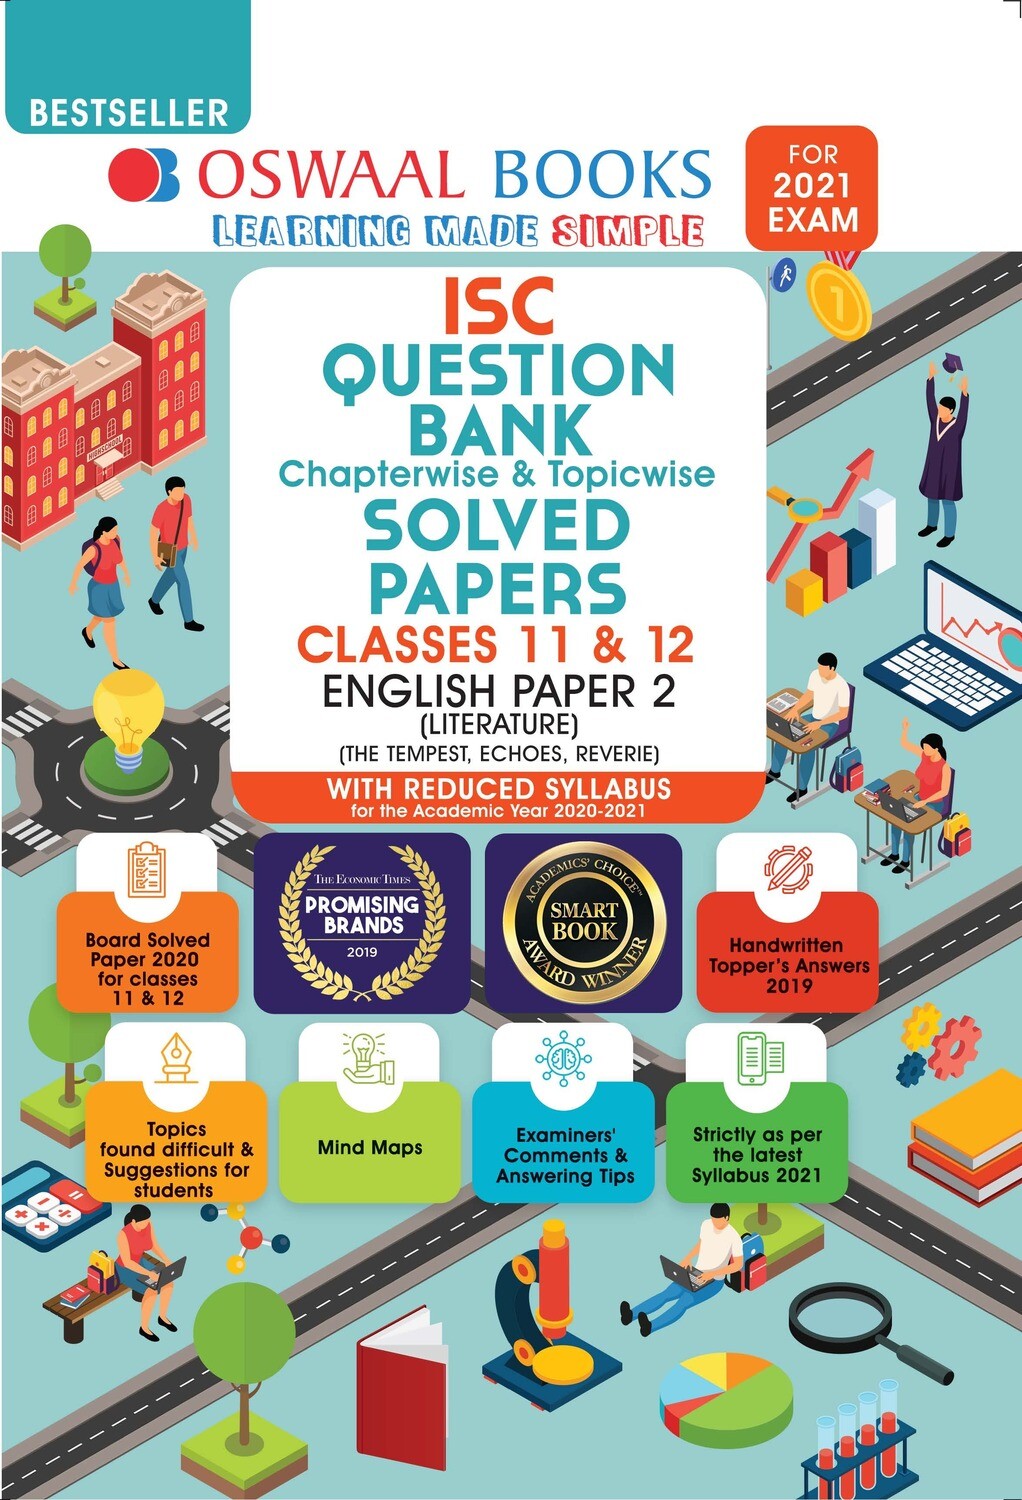 Buy e-book: Oswaal ISC Question Bank Chapterwise & Topicwise Solved Papers, English Paper - 2, Class 12 (Reduced